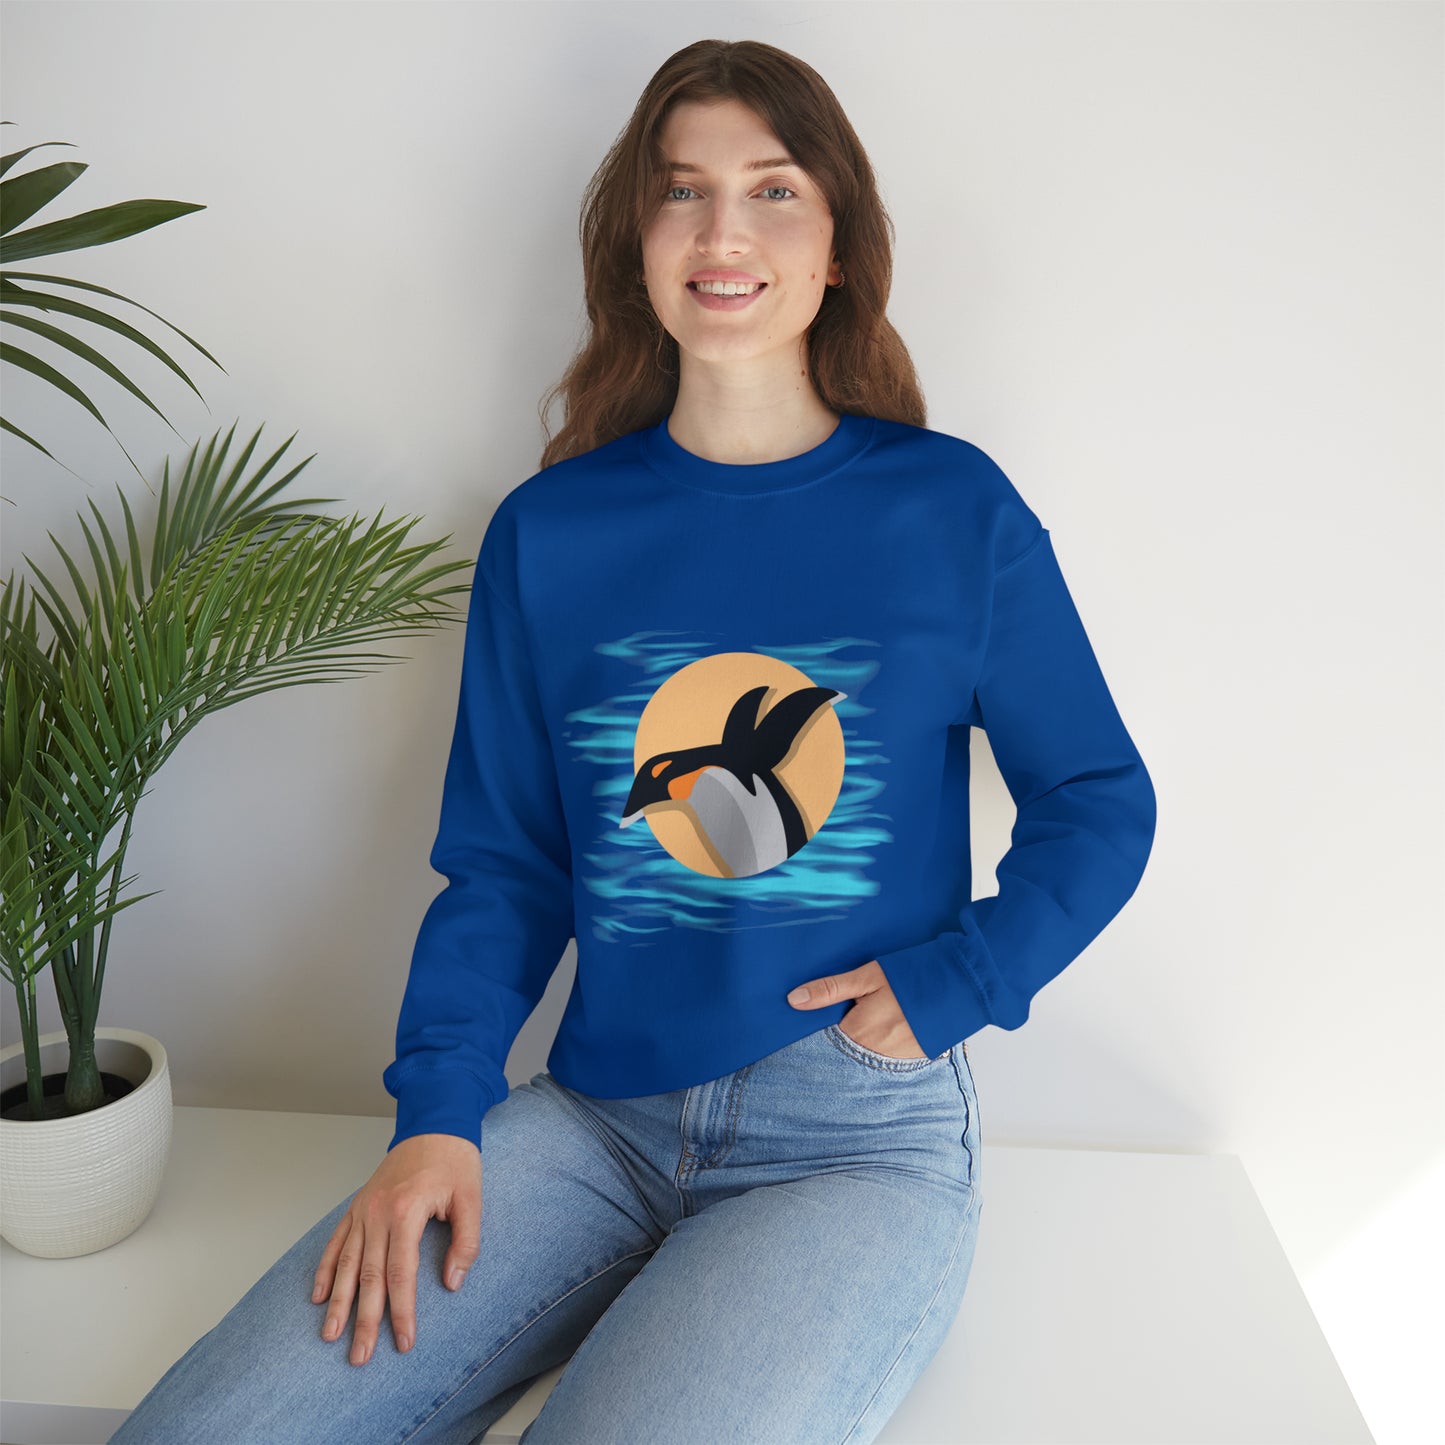 Colorful and playful penguin retro design. Give the gift of this Unisex Heavy Blend™ Crewneck Sweatshirt or get one for yourself.